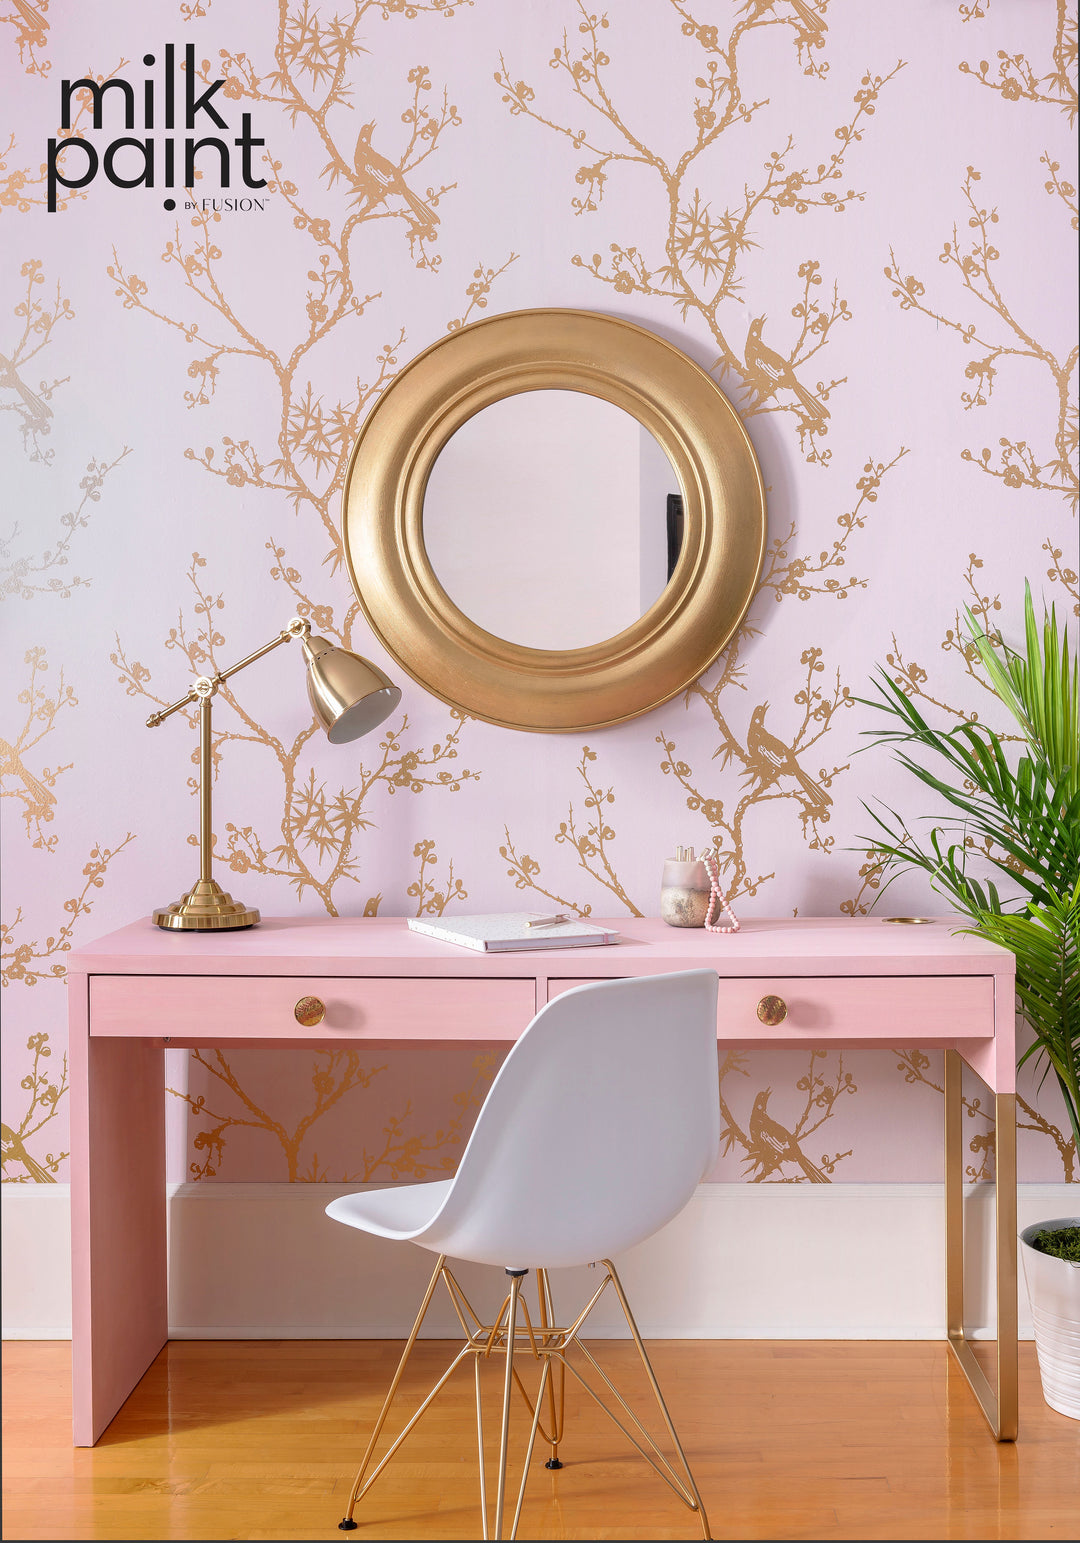 Milk Paint by Fusion - MILLENIAL PINK - Rustic Farmhouse Charm